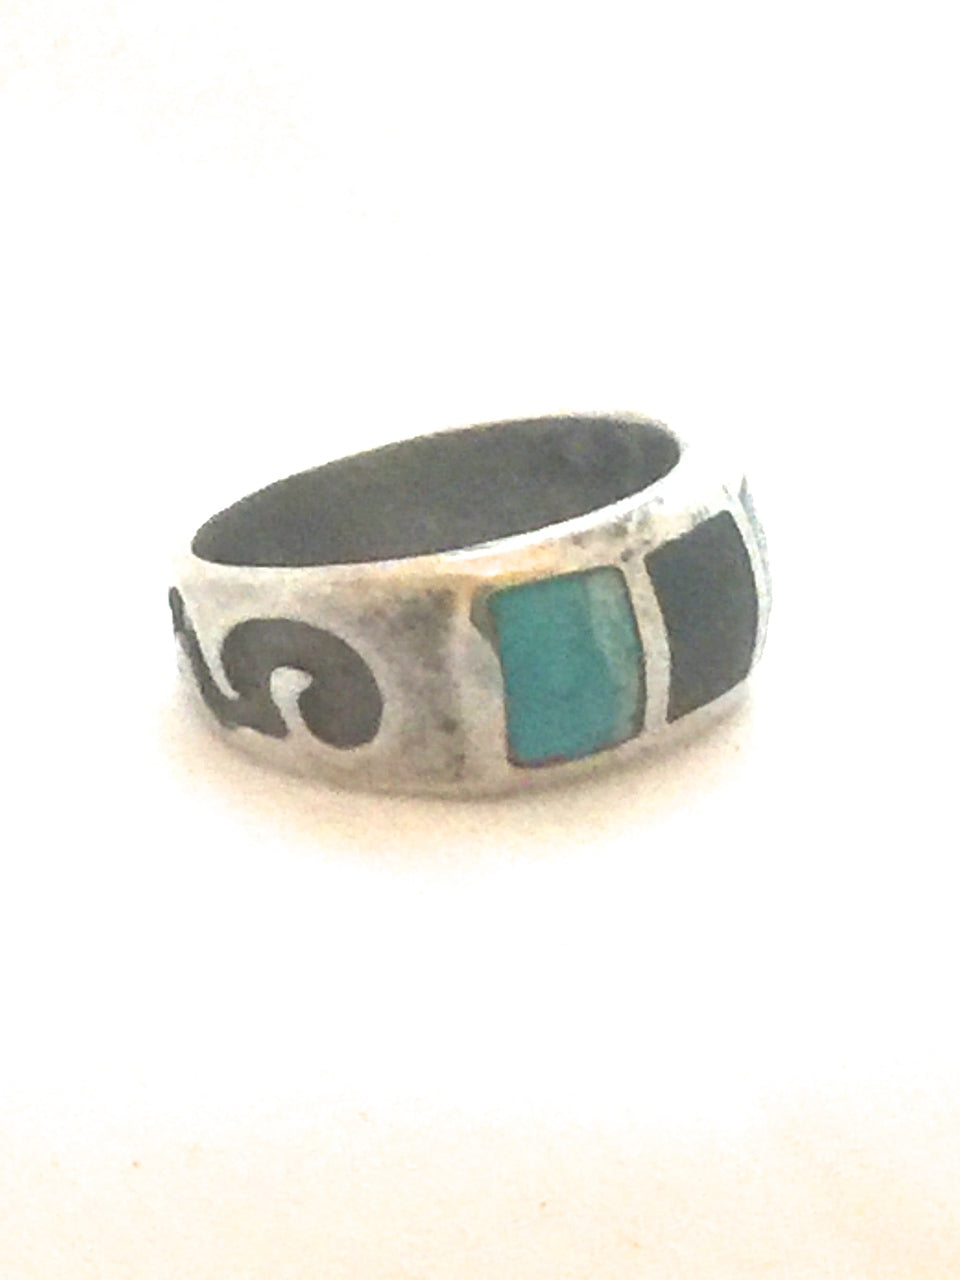 Vintage Sterling Silver Southwest Tribal Ring  Band Onyx & Turquoise   Size 9   7.7g